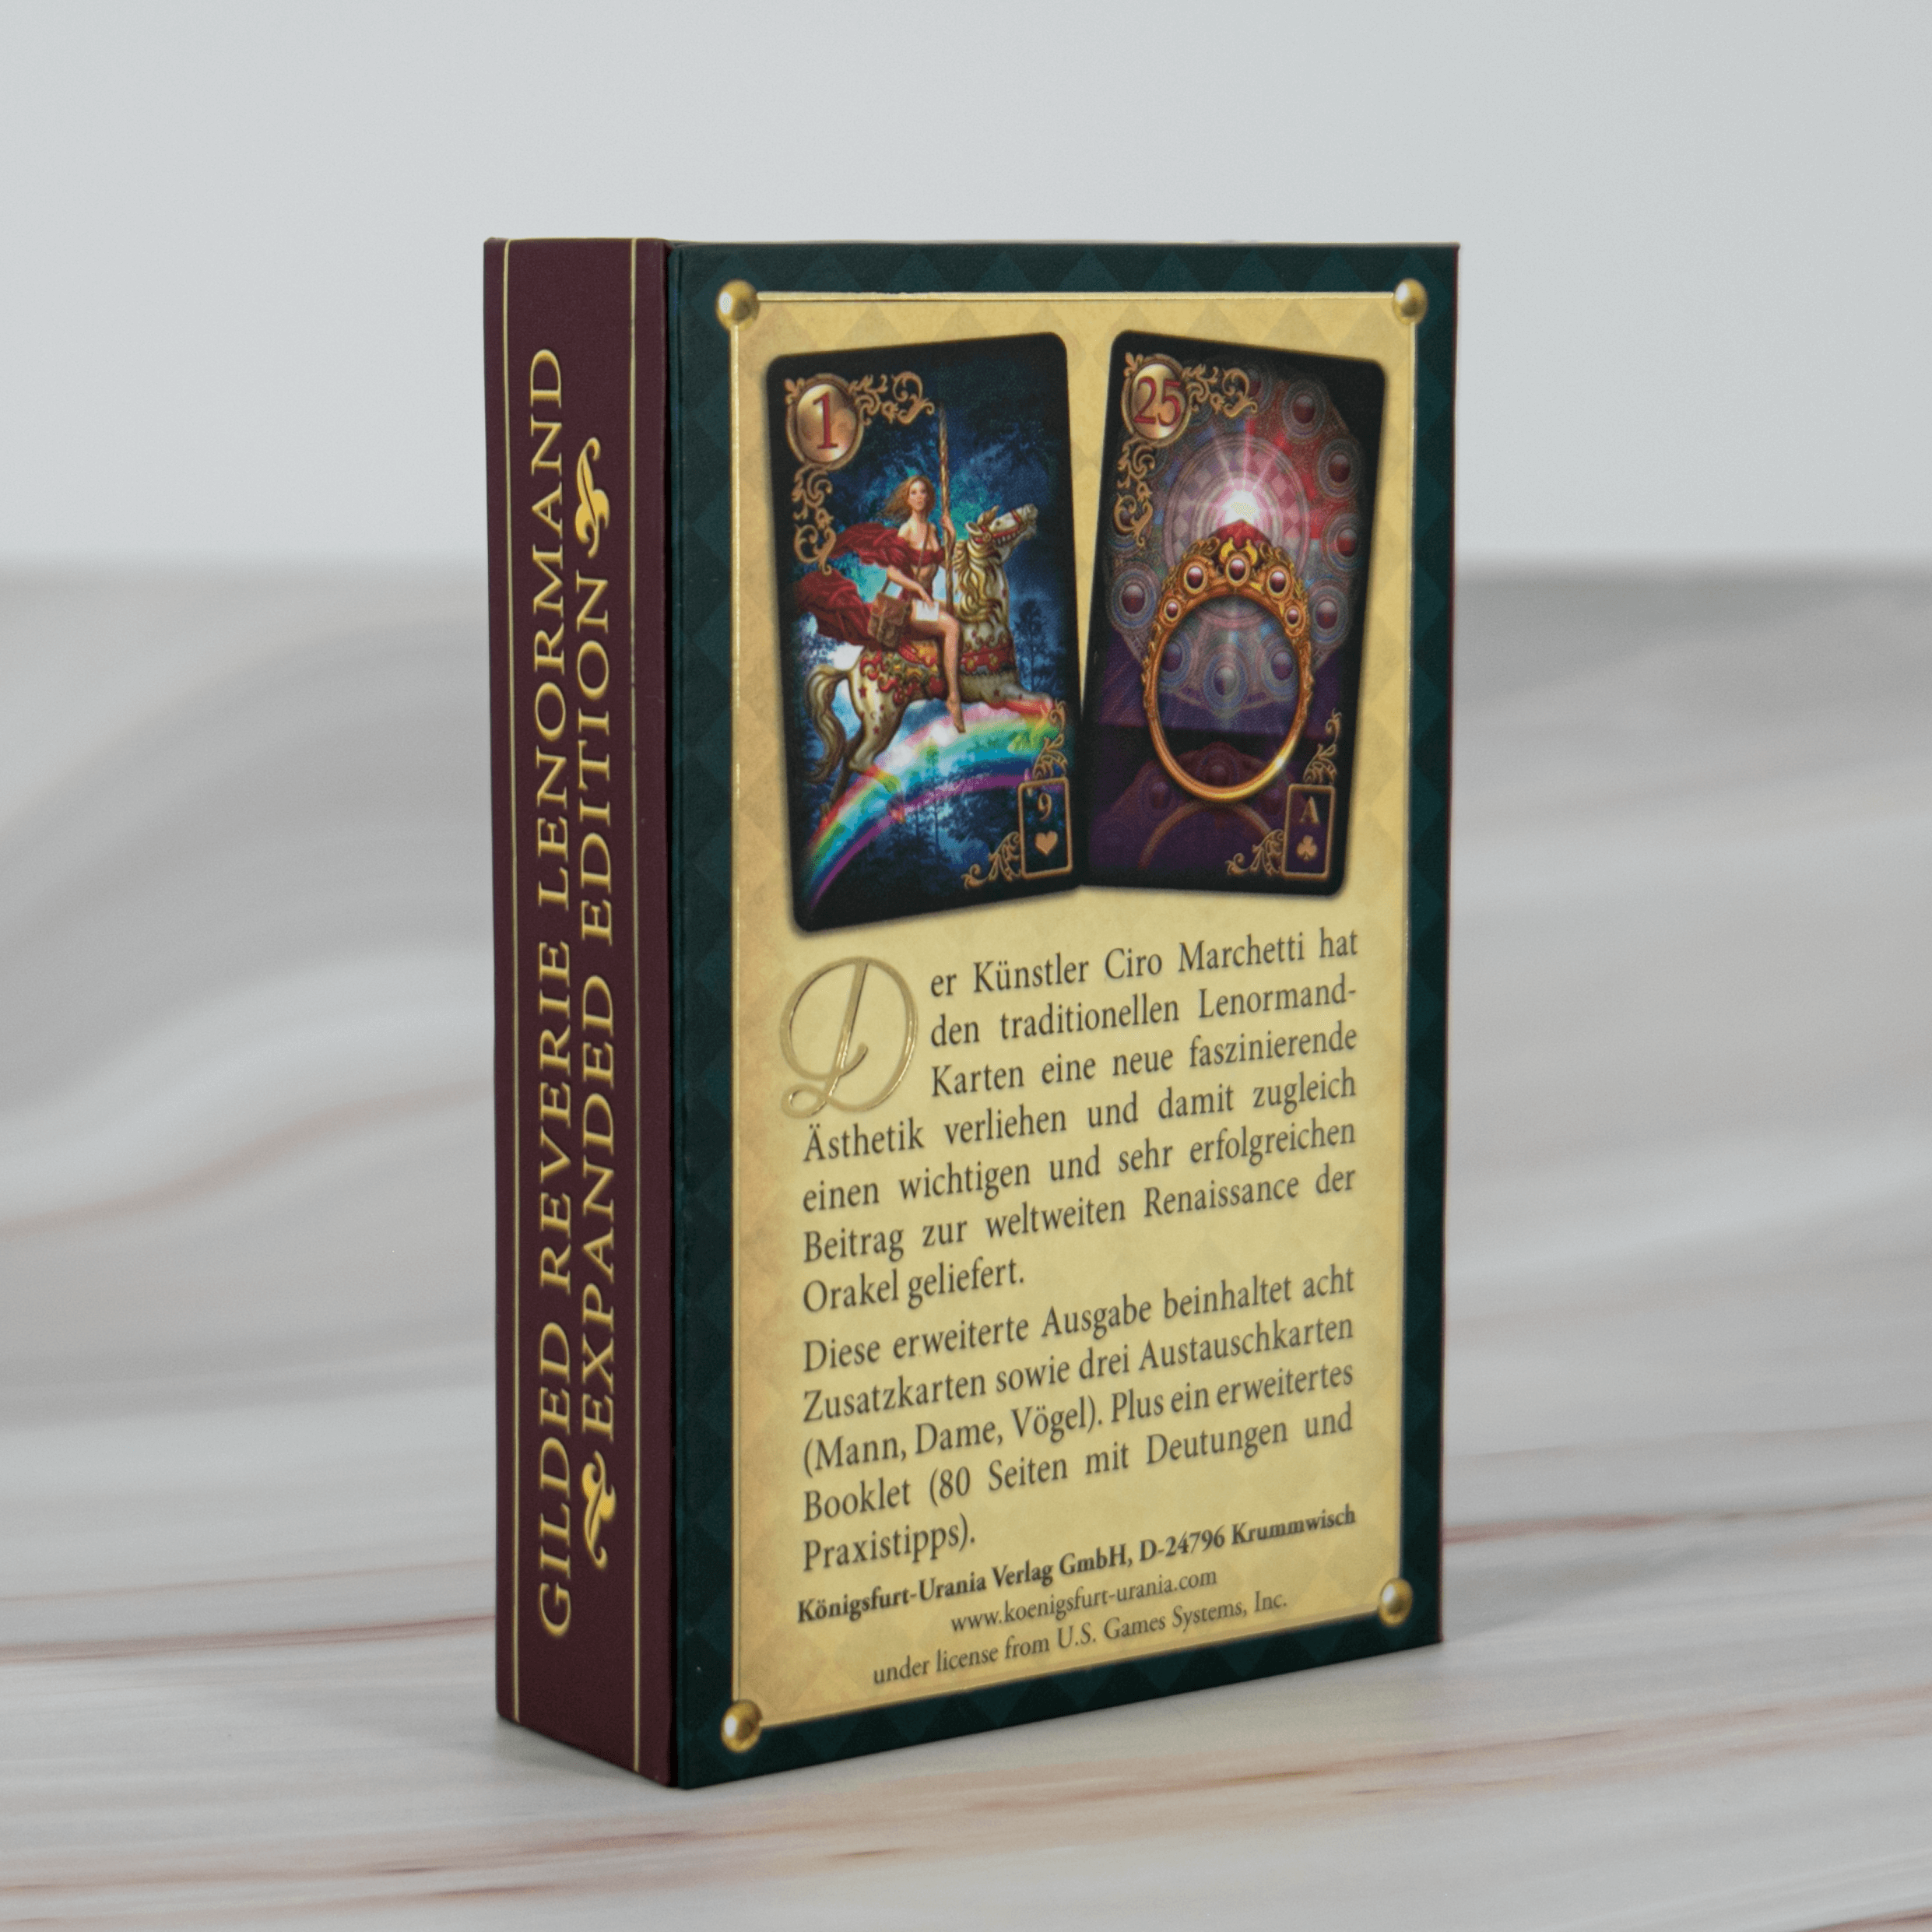 Gilded Reverie Lenormand - Expanded Edition